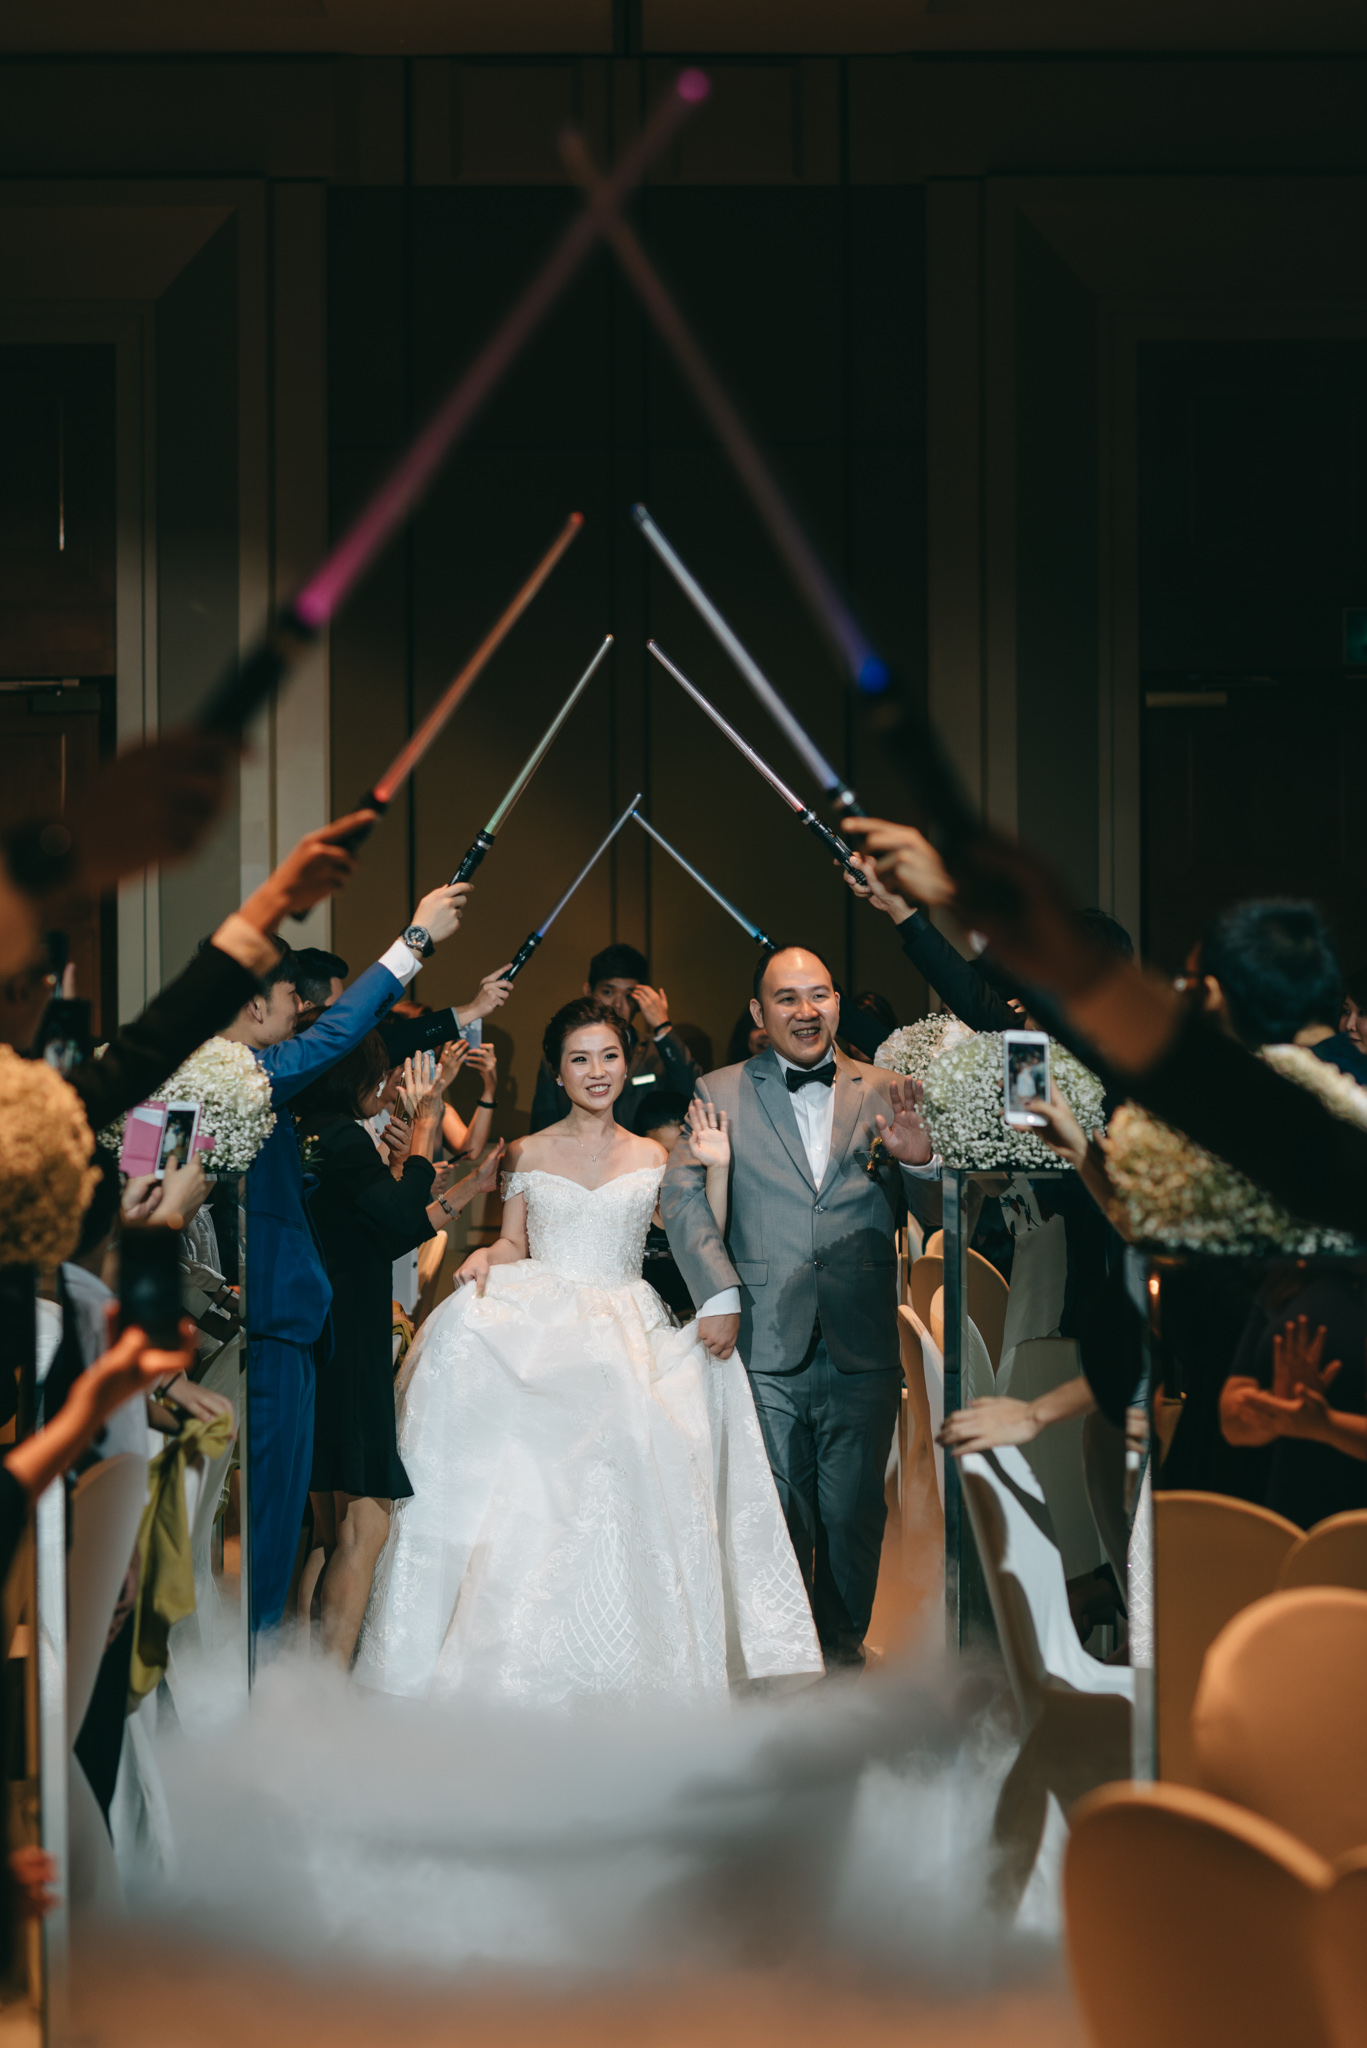 Eunice & Winshire Wedding Day Highlights (resized for sharing) - 182.jpg